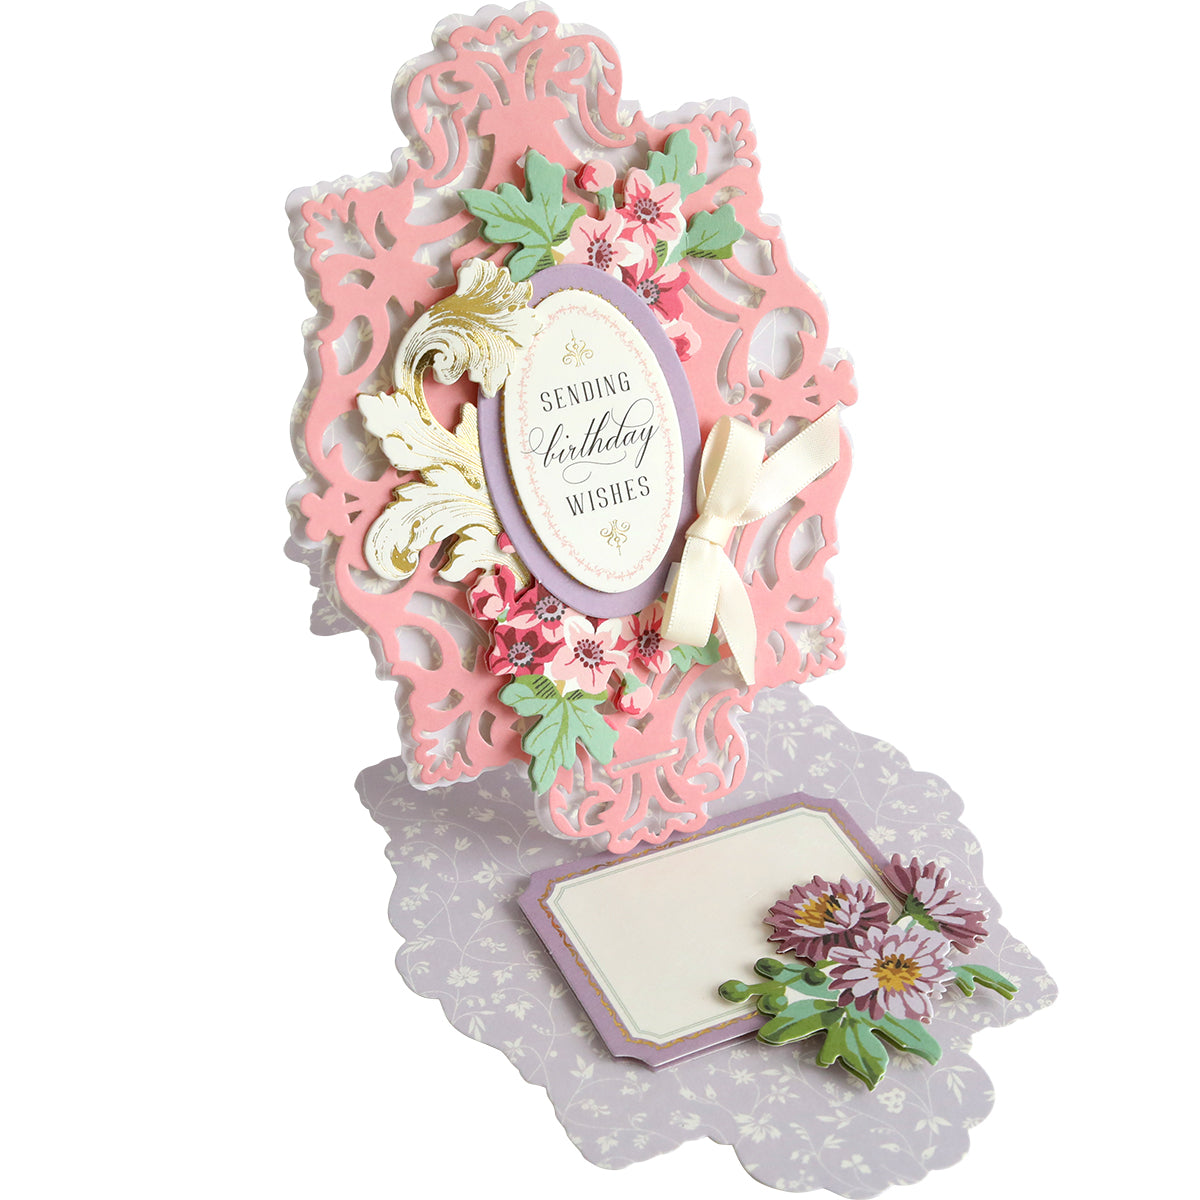 A handmade card featuring flowers and a frame. Perfect for Simply Birthday Easel Card Making Kit enthusiasts or as a Simply Birthday Easel Card Making Kit.